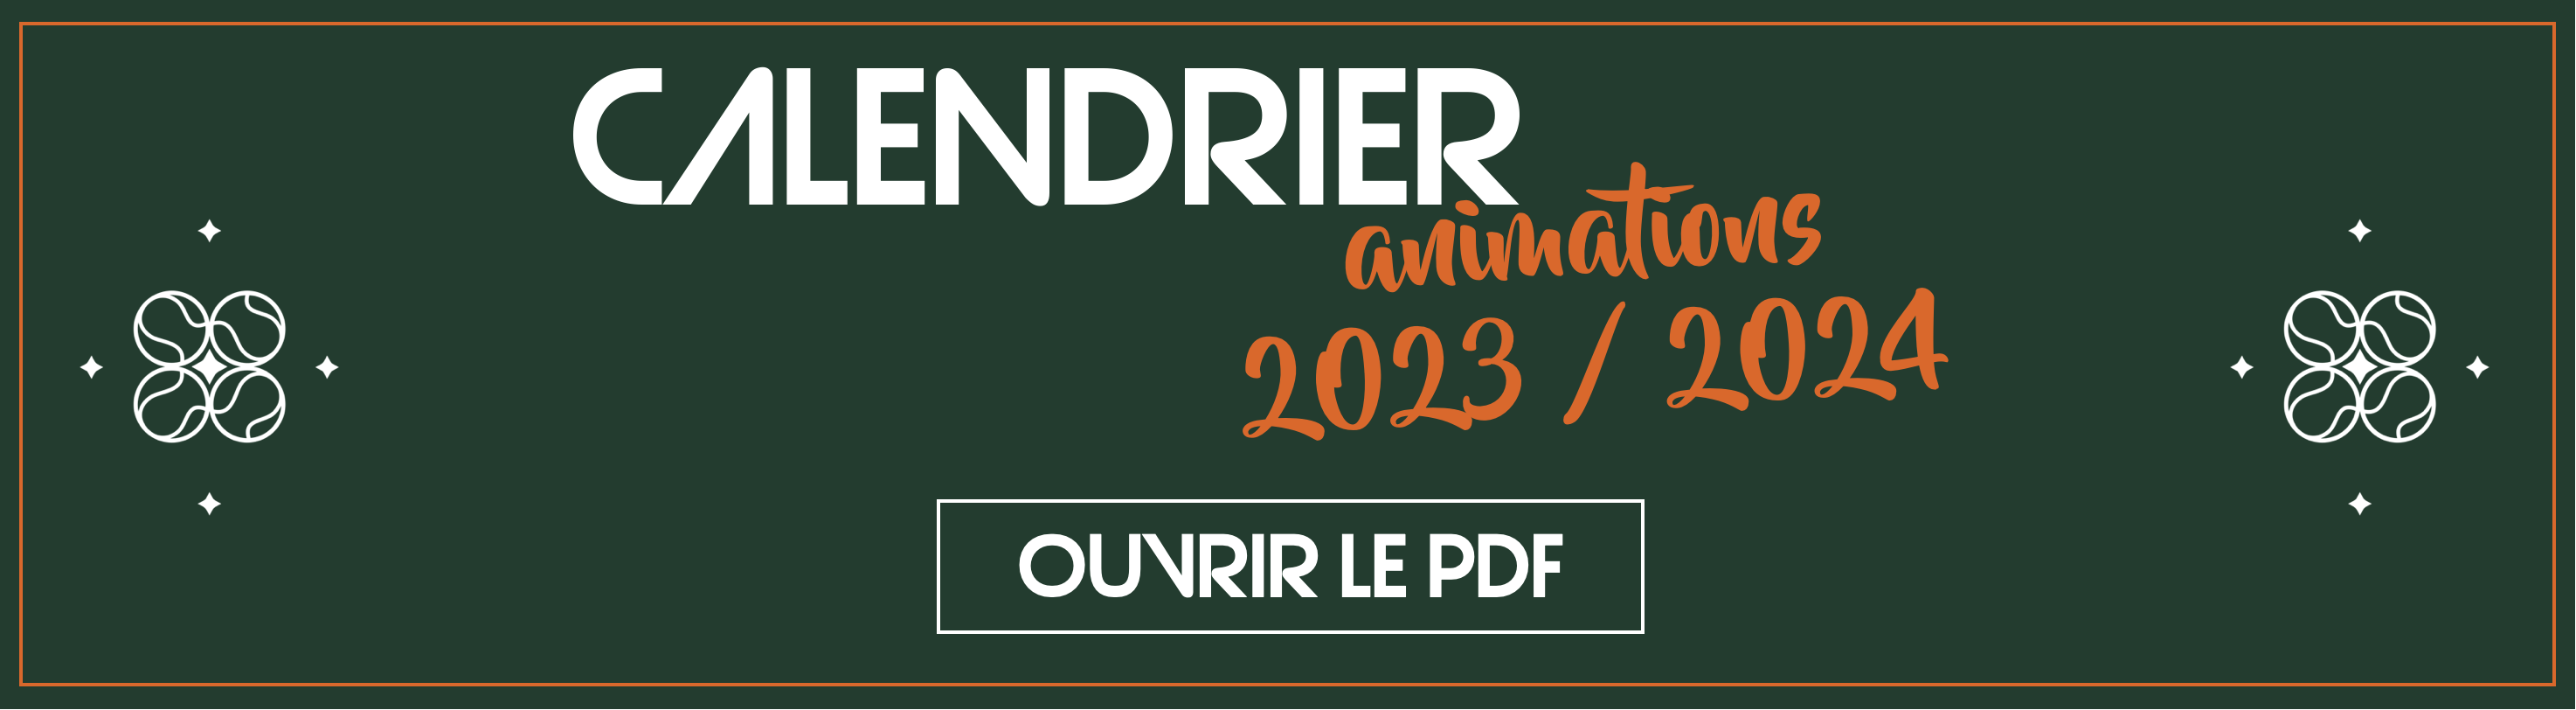 Calendrier animations